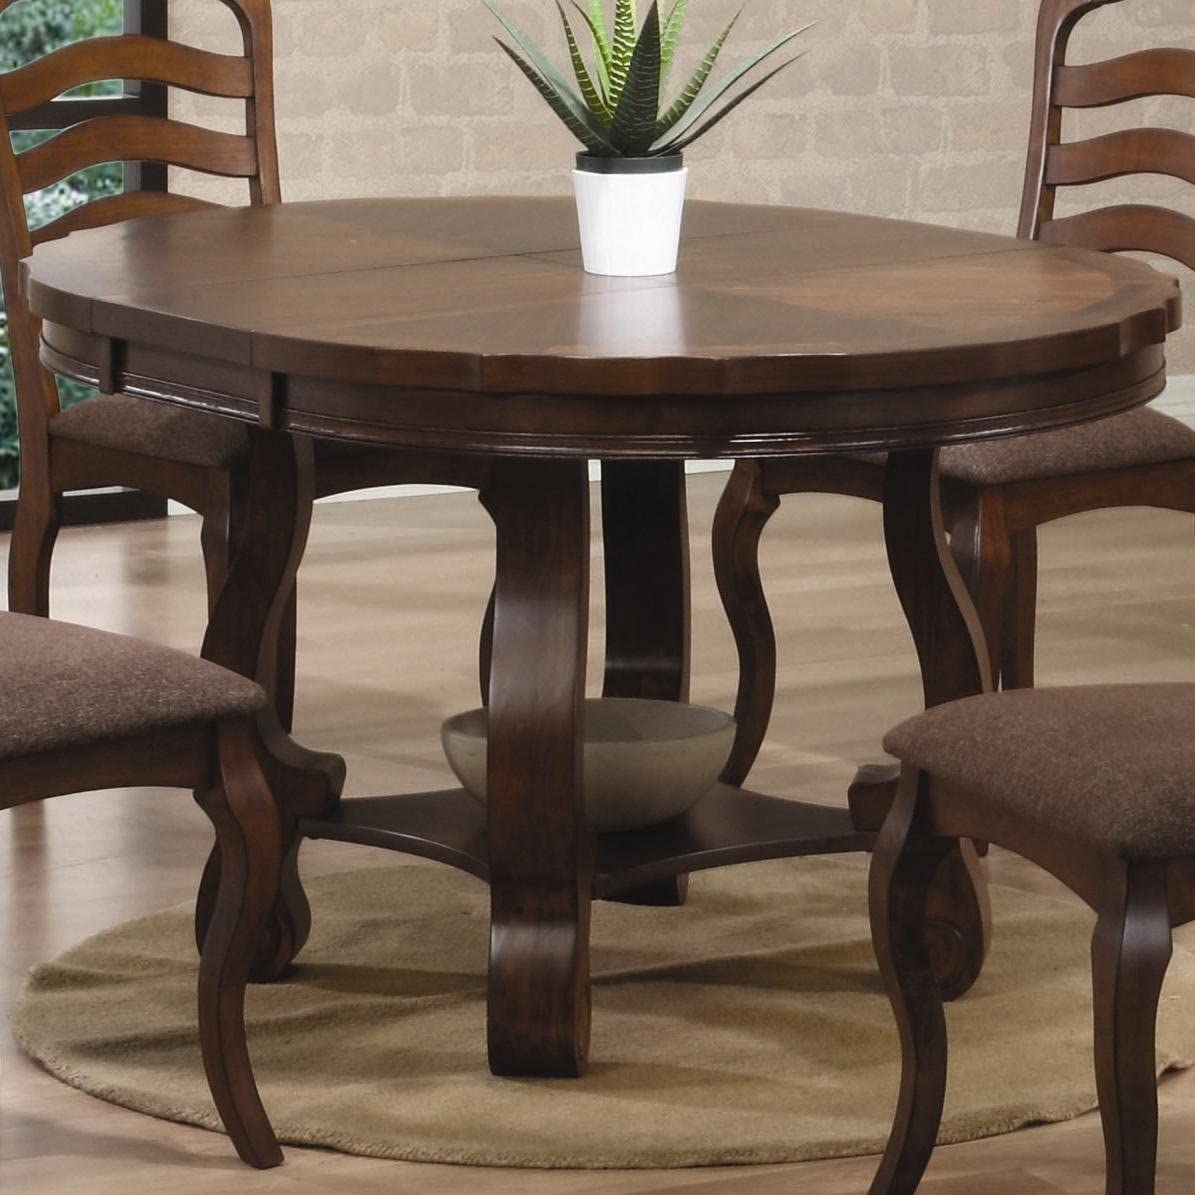 Round dining table with butterfly leaf 1